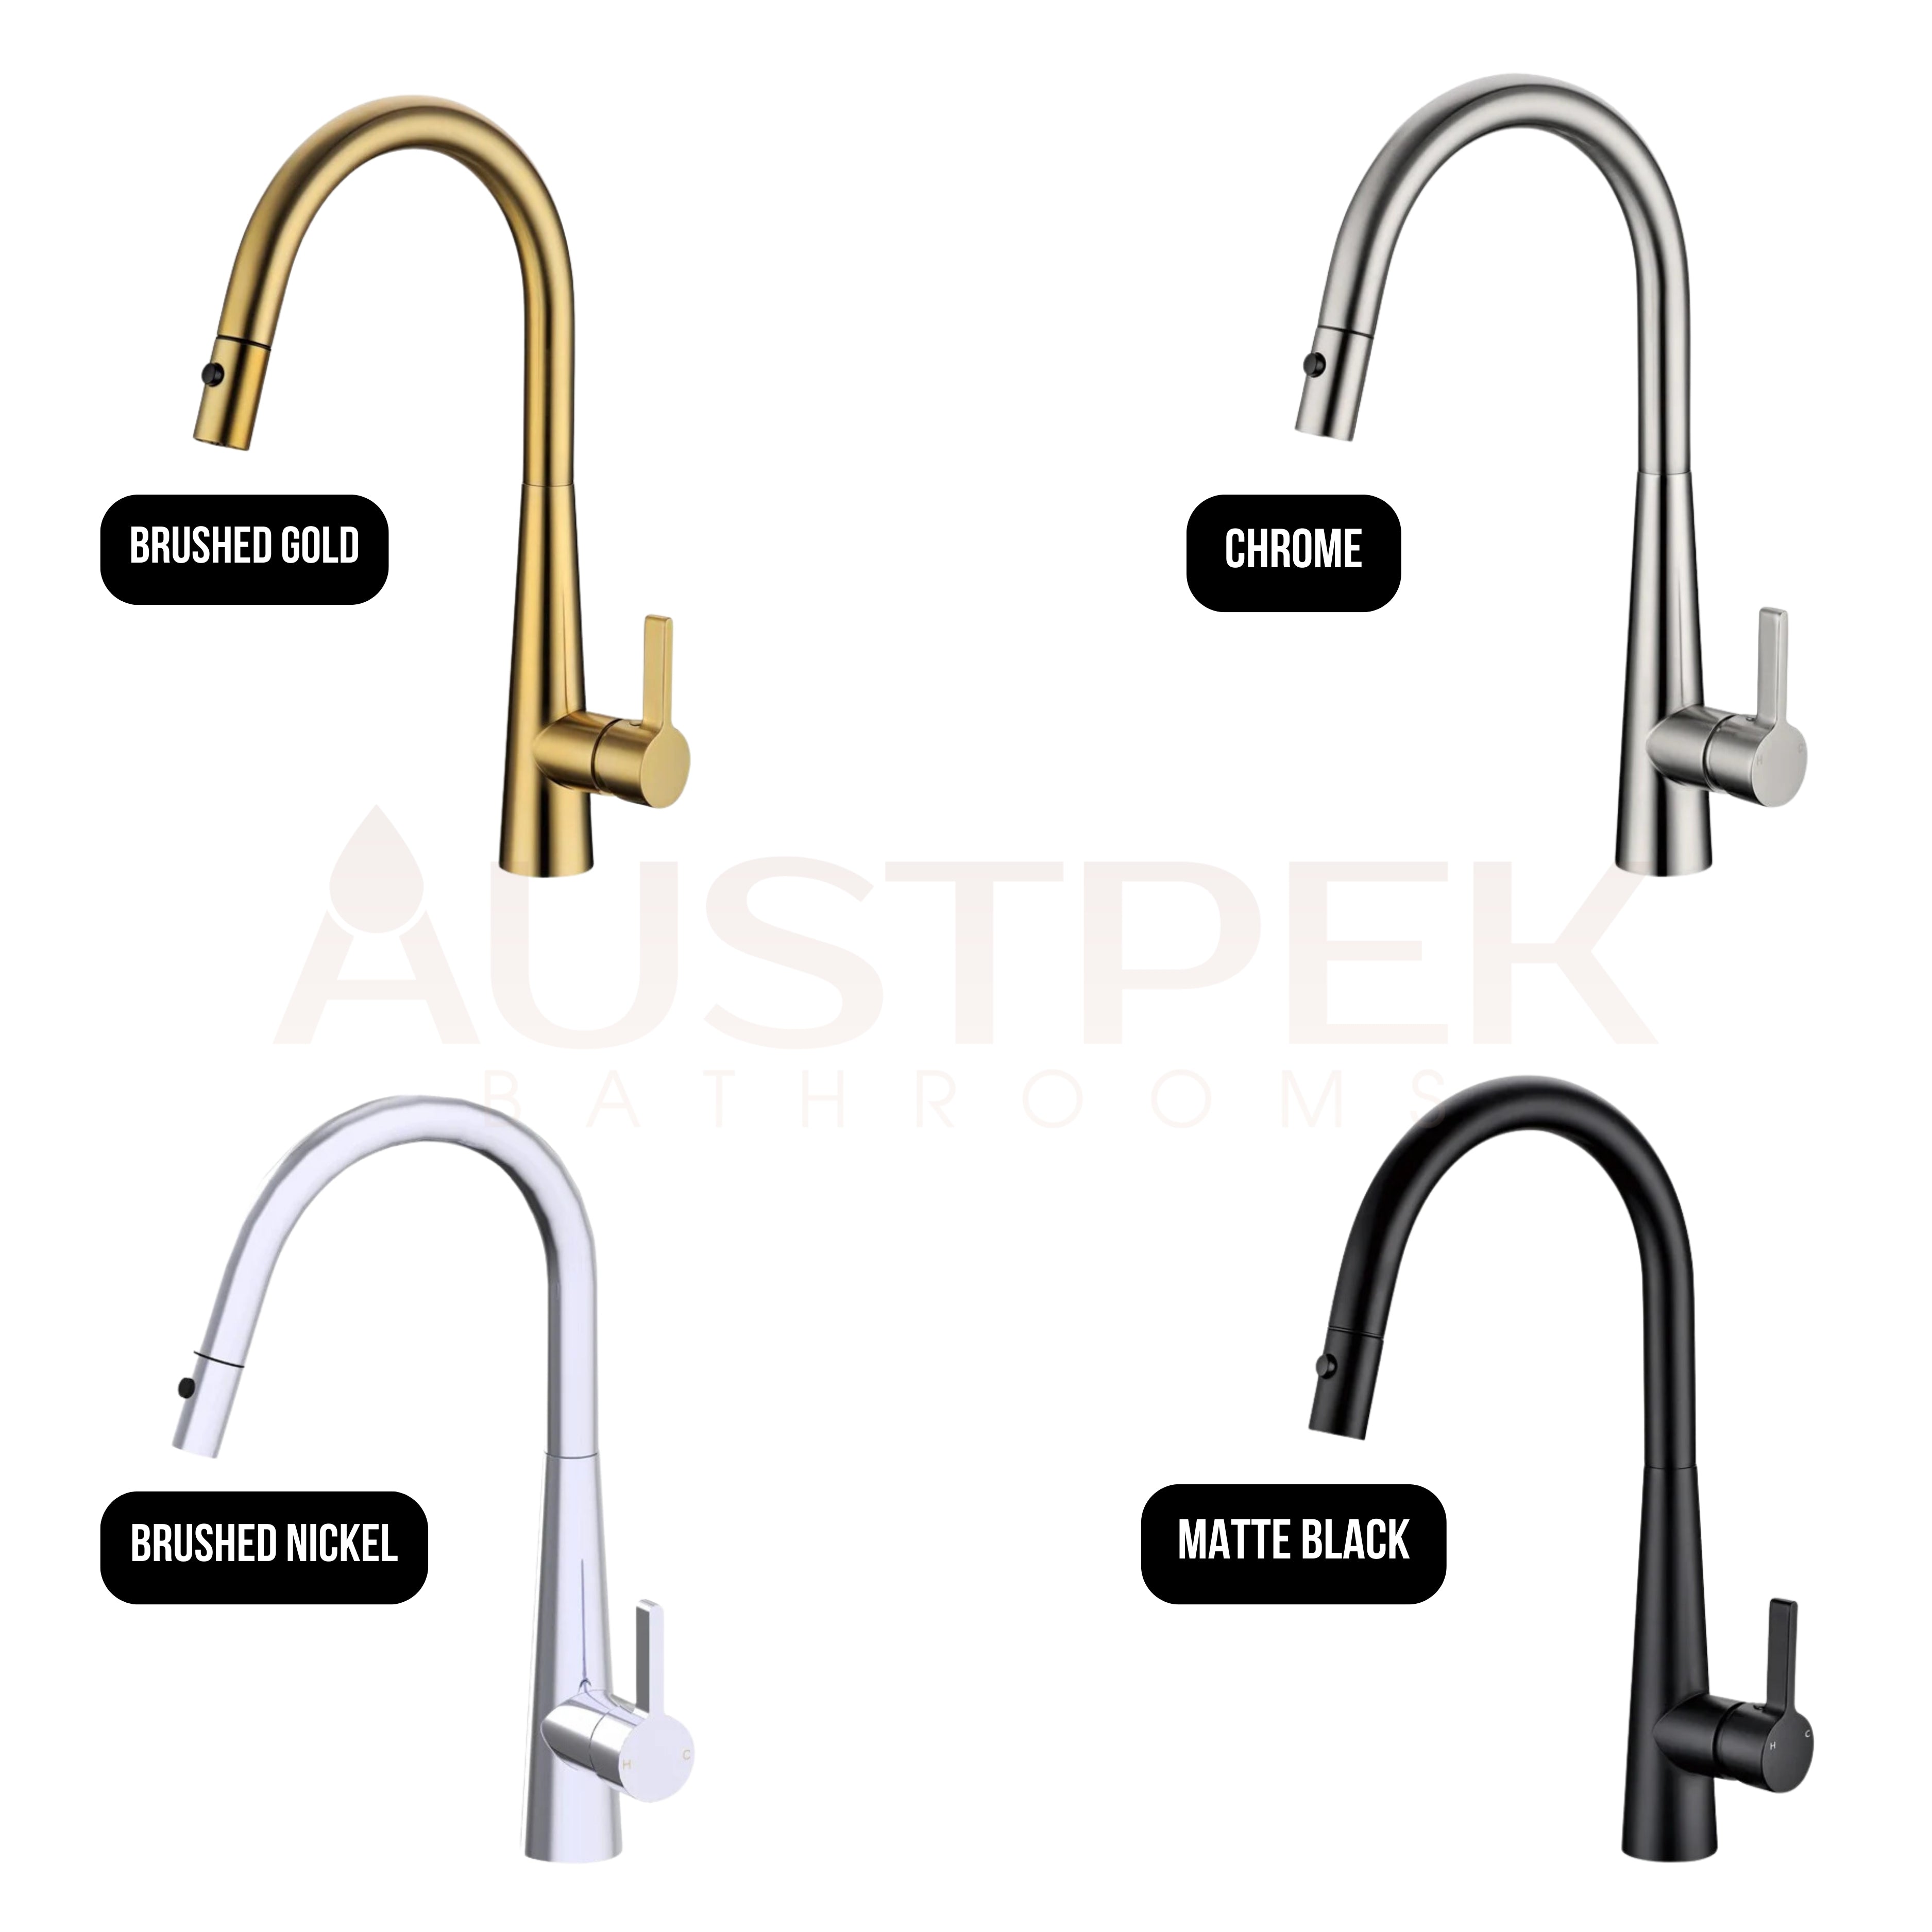 IKON OTUS LUX PULL-OUT SINK MIXER BRUSHED GOLD